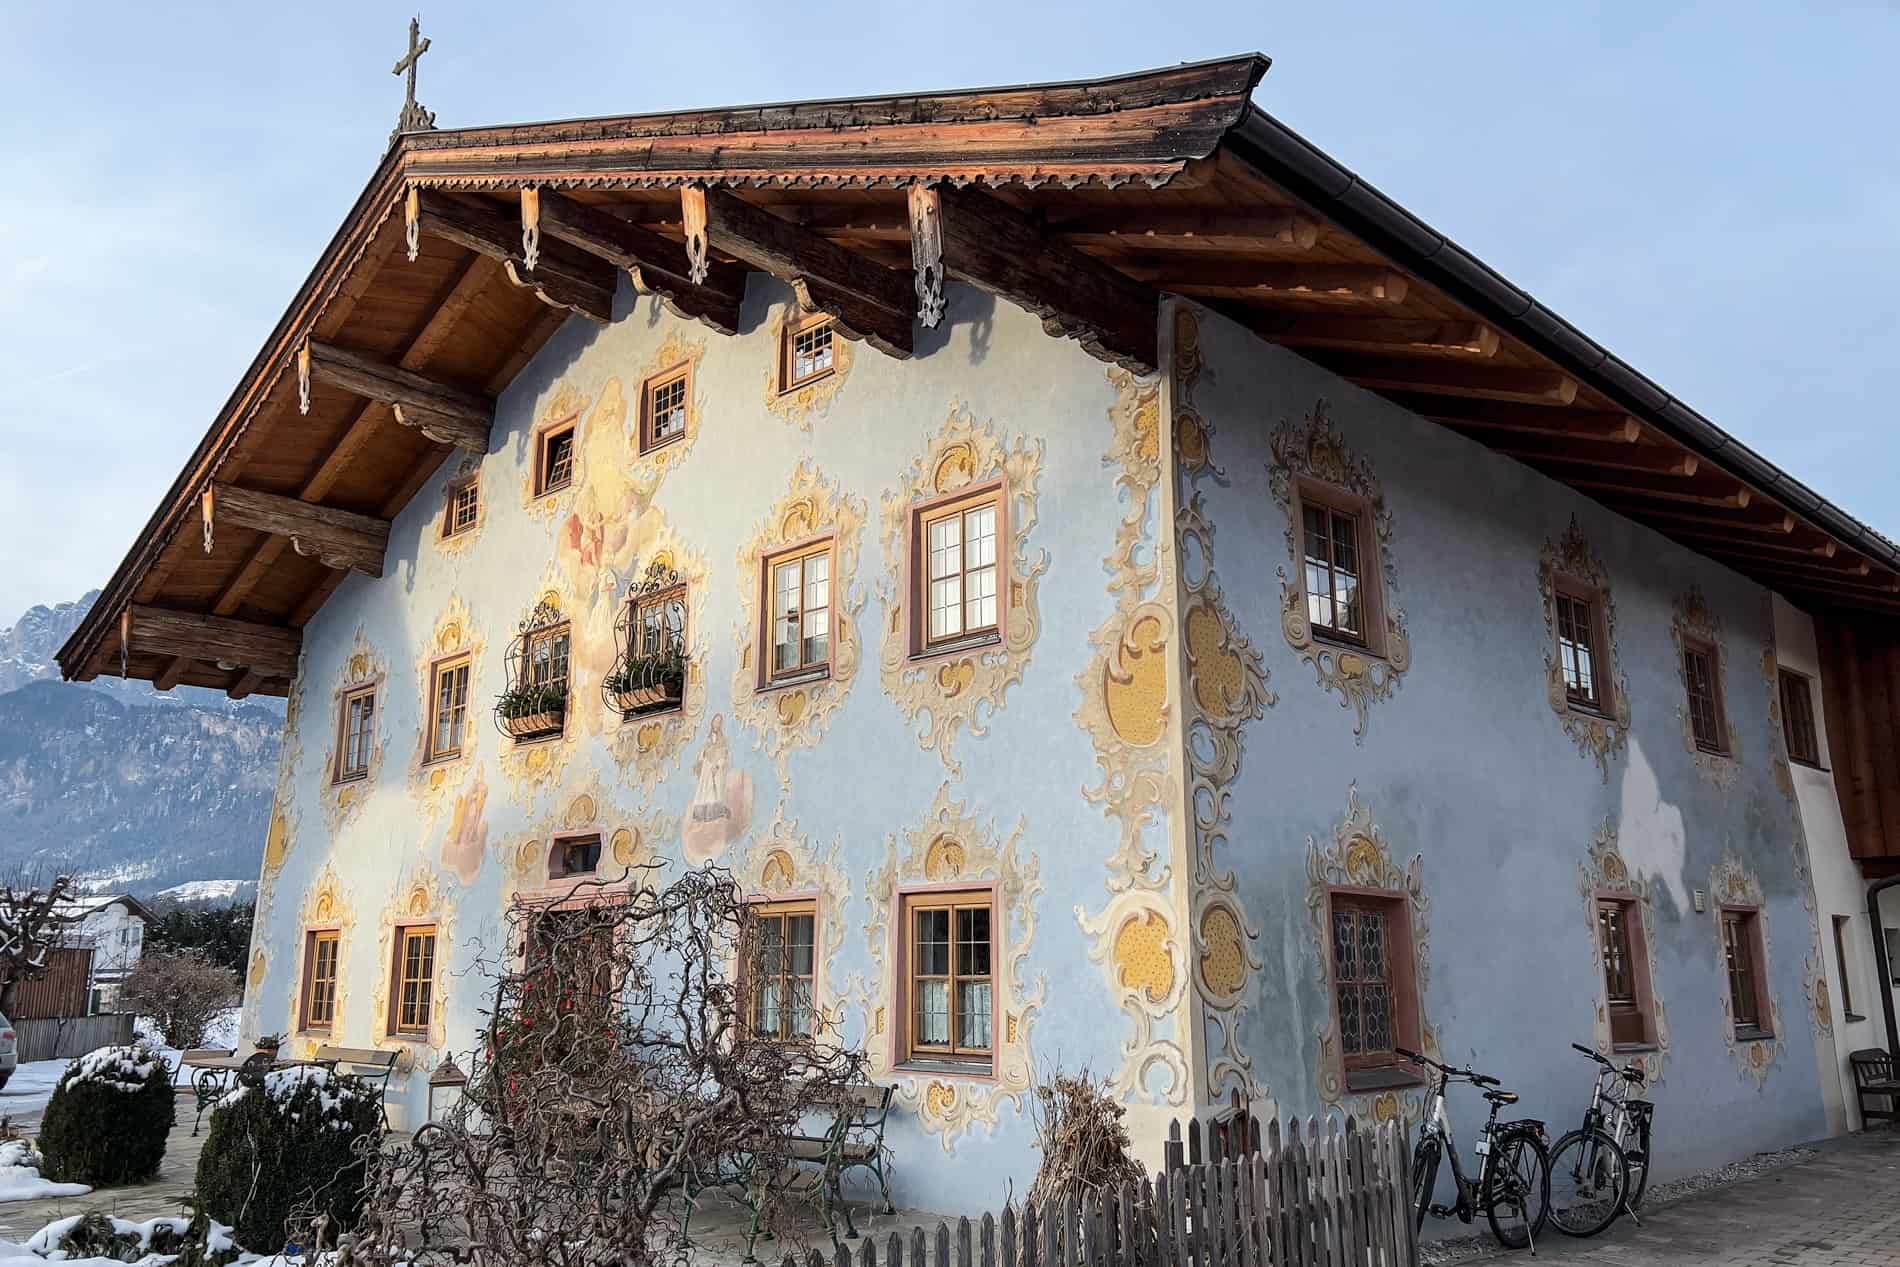 A traditional alpine house in Austria with a wooden roof and painted motif facade. 